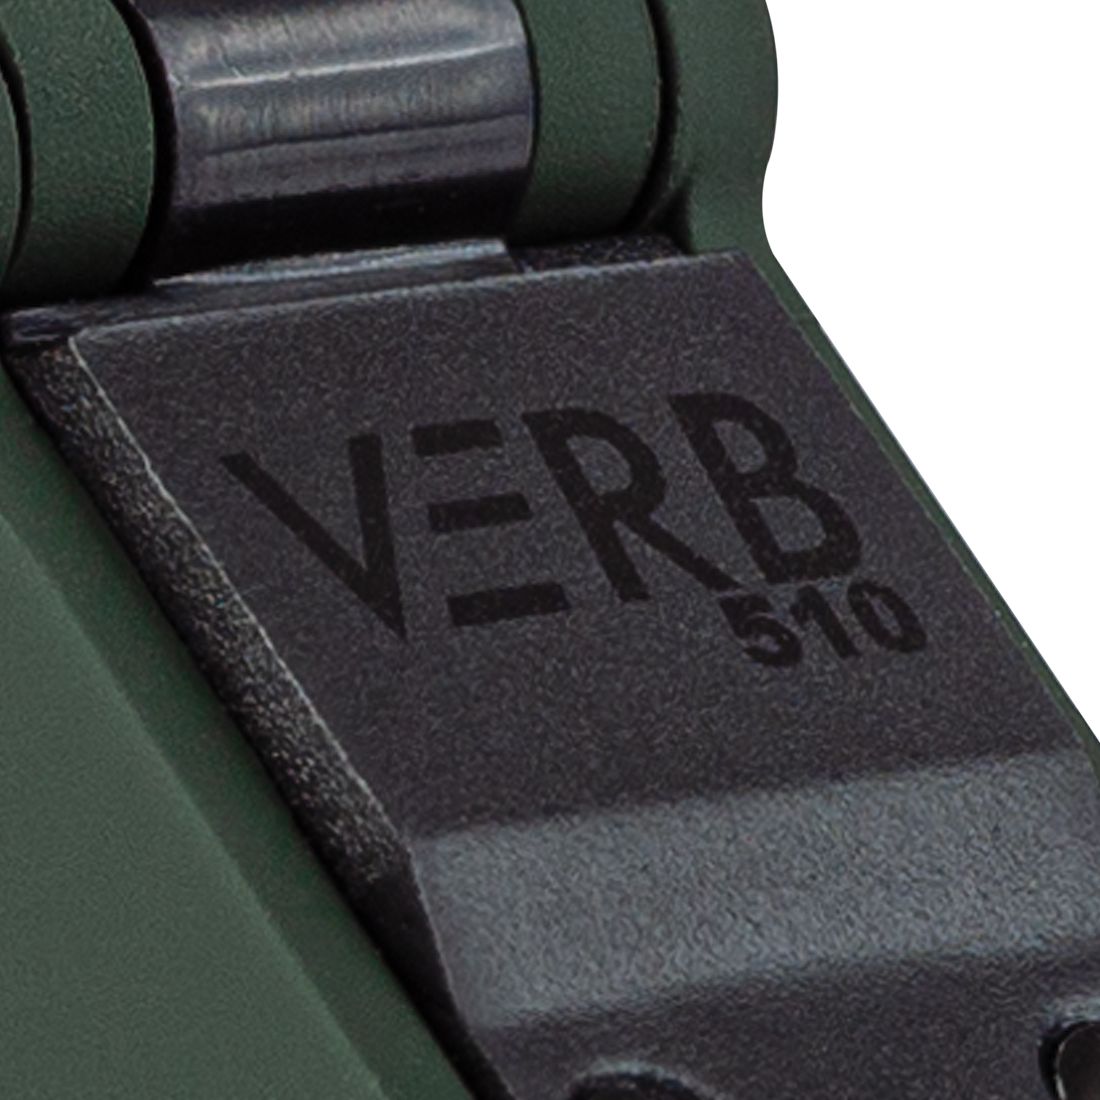 VERB 510 Battery (Olive) – RYOT Canada